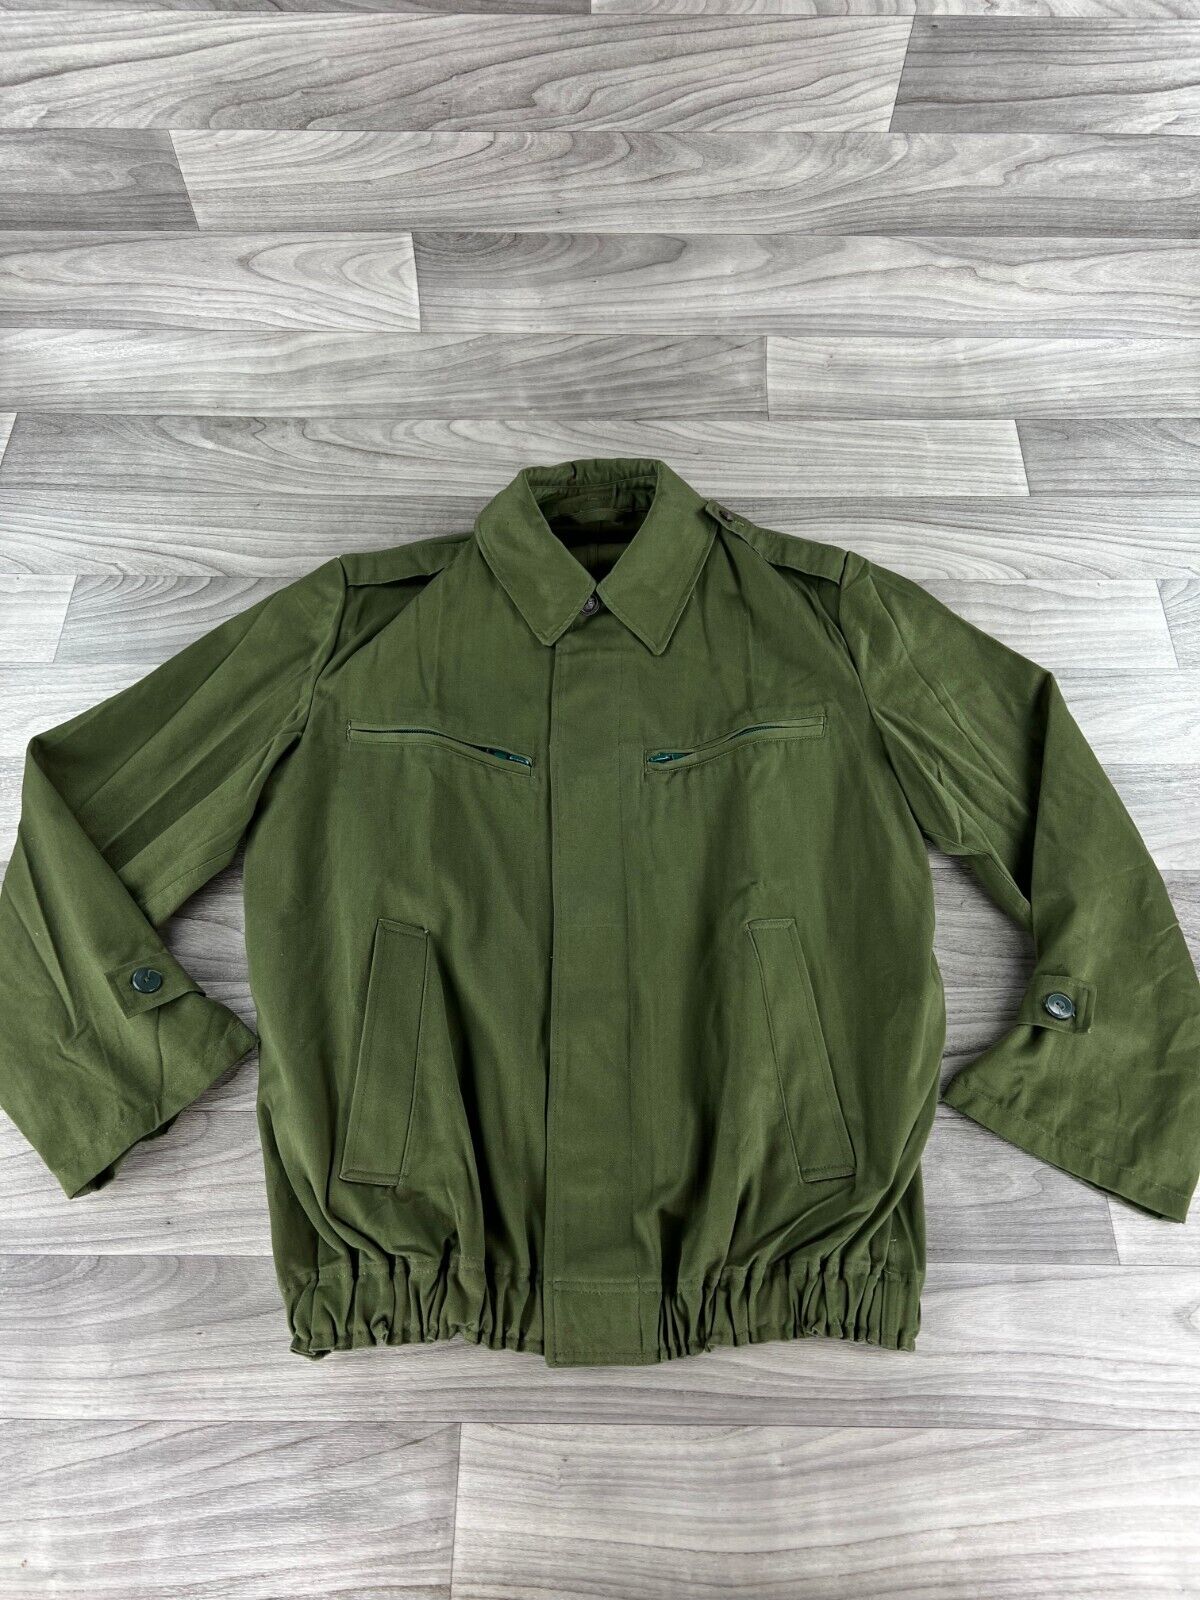 Vintage Hungarian Airforce Jacket Mens Surplus Green Metal Buttons Front Pockets